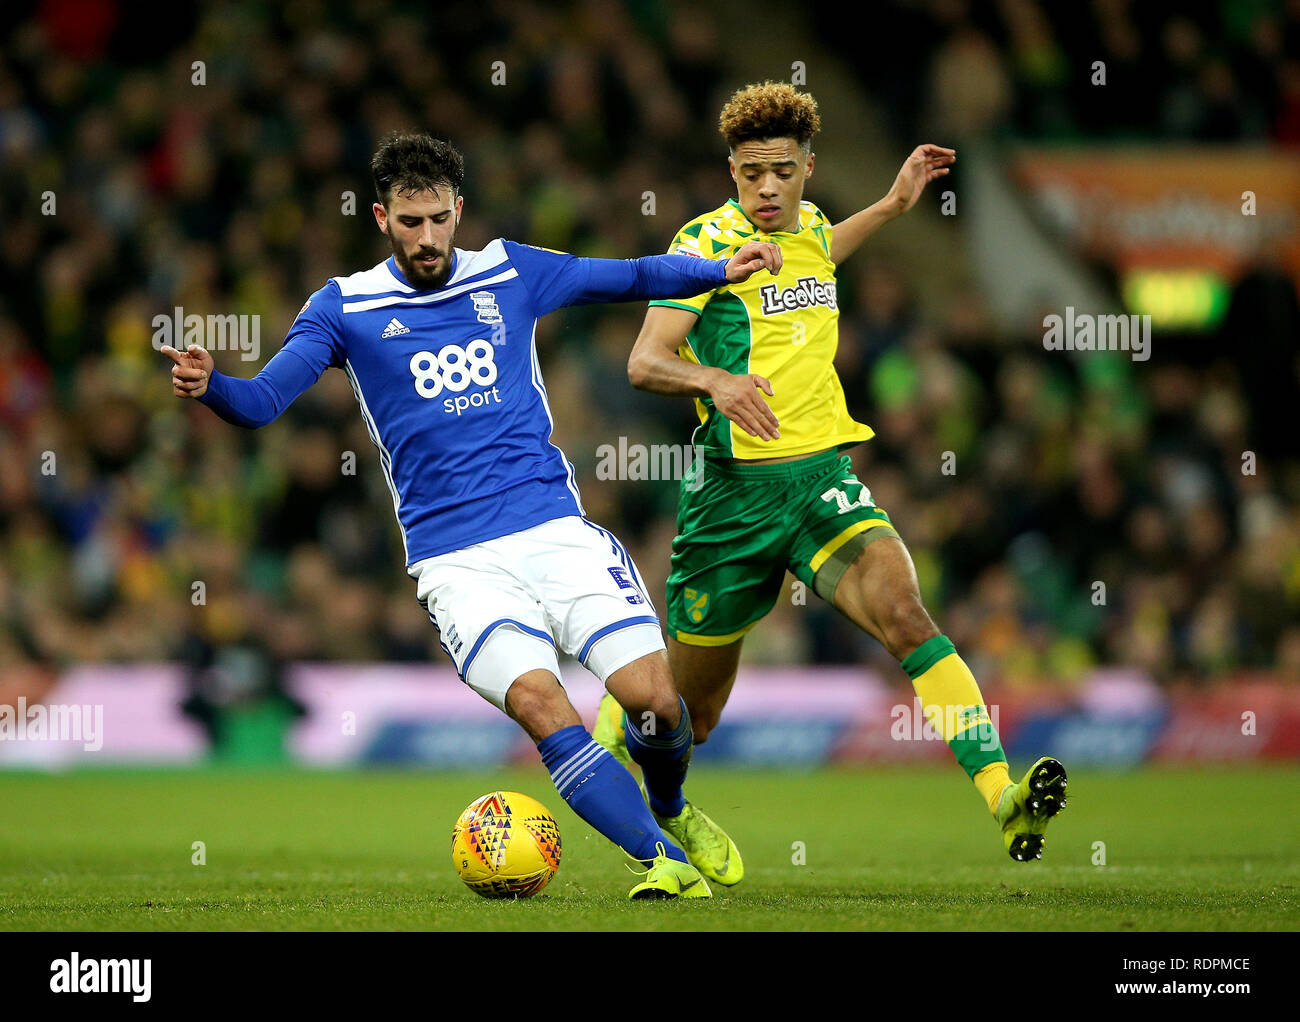 Birmingham City's Maxime Colin (left) and Norwich City's Jamal Lewis (right) battle for the ball during the Sky Bet Championship match at Carrow Road, Norwich. Stock Photo